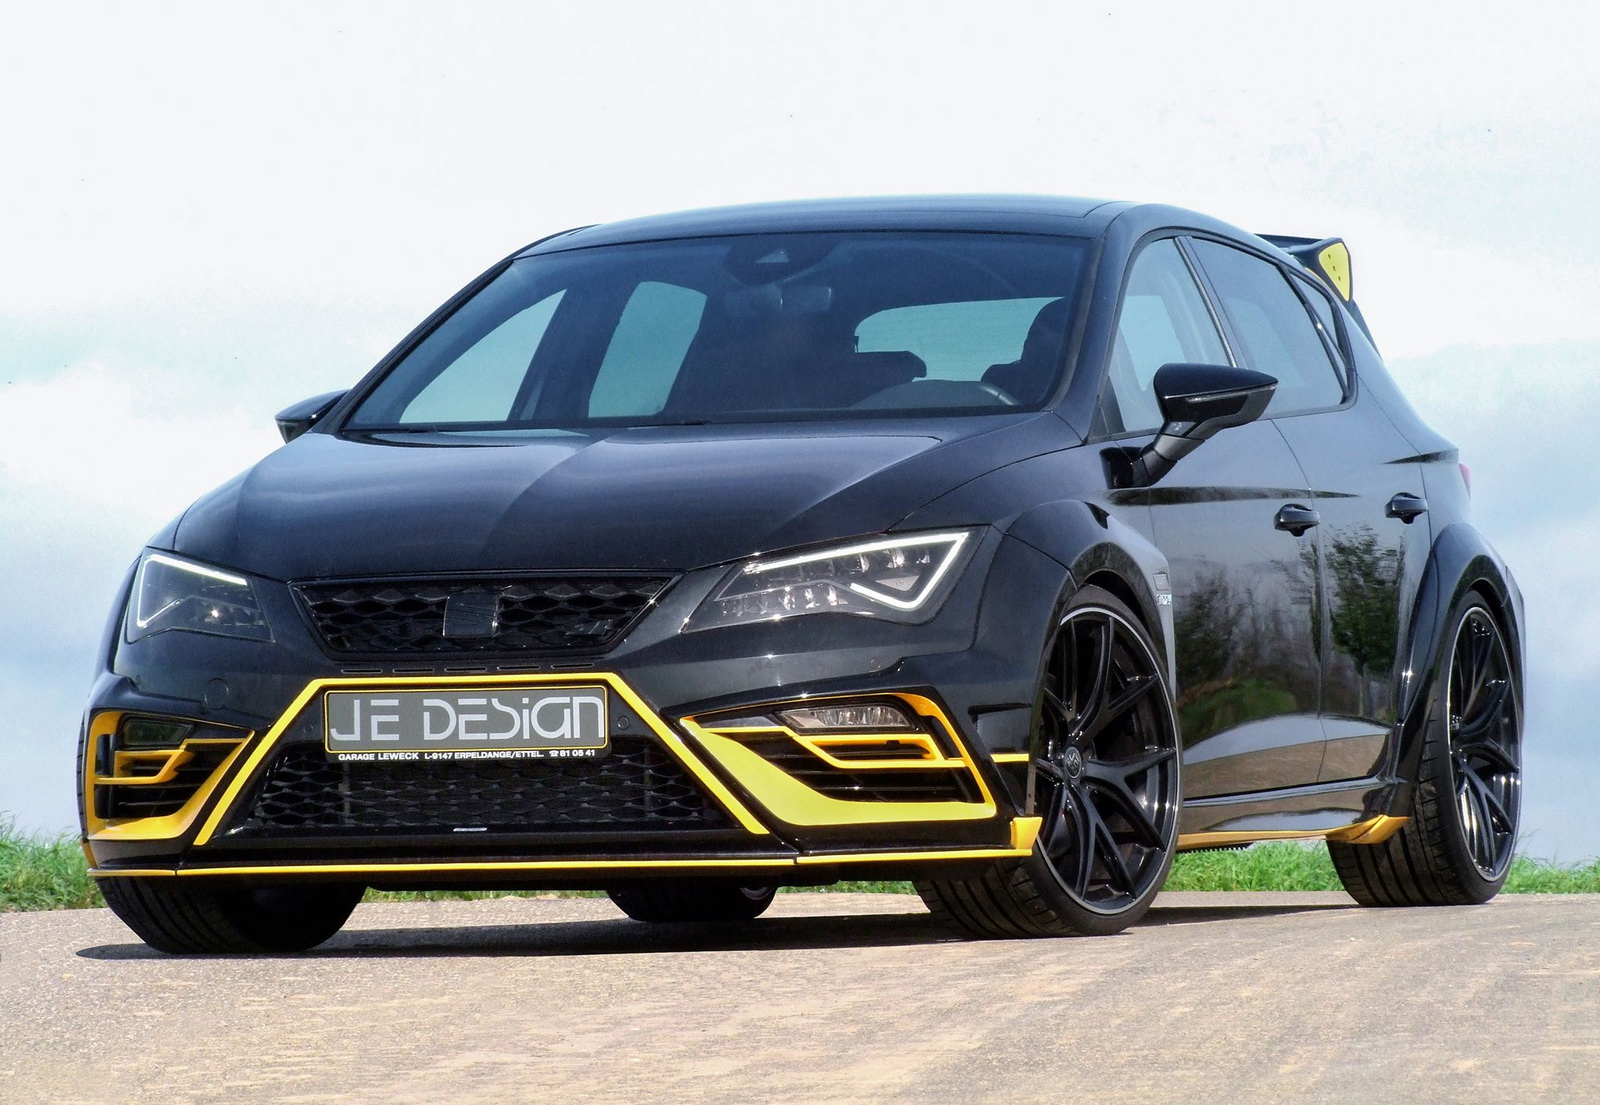 Facelifted Seat Leon Cupra Muscled Up With 375 Horses